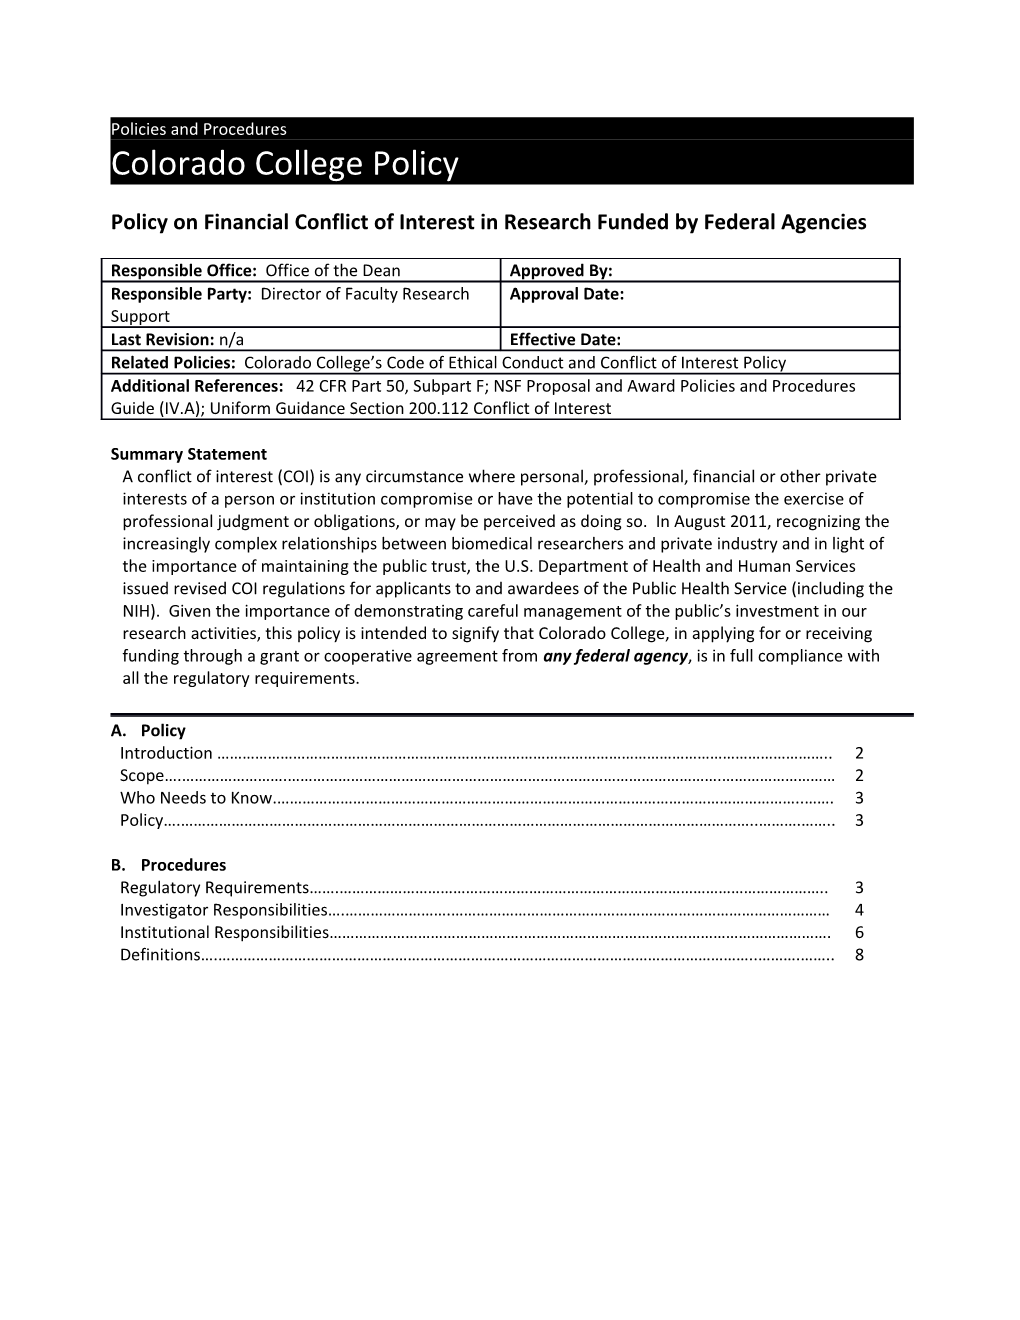 Policy on Financial Conflict of Interest in Research Funded by Federal Agencies